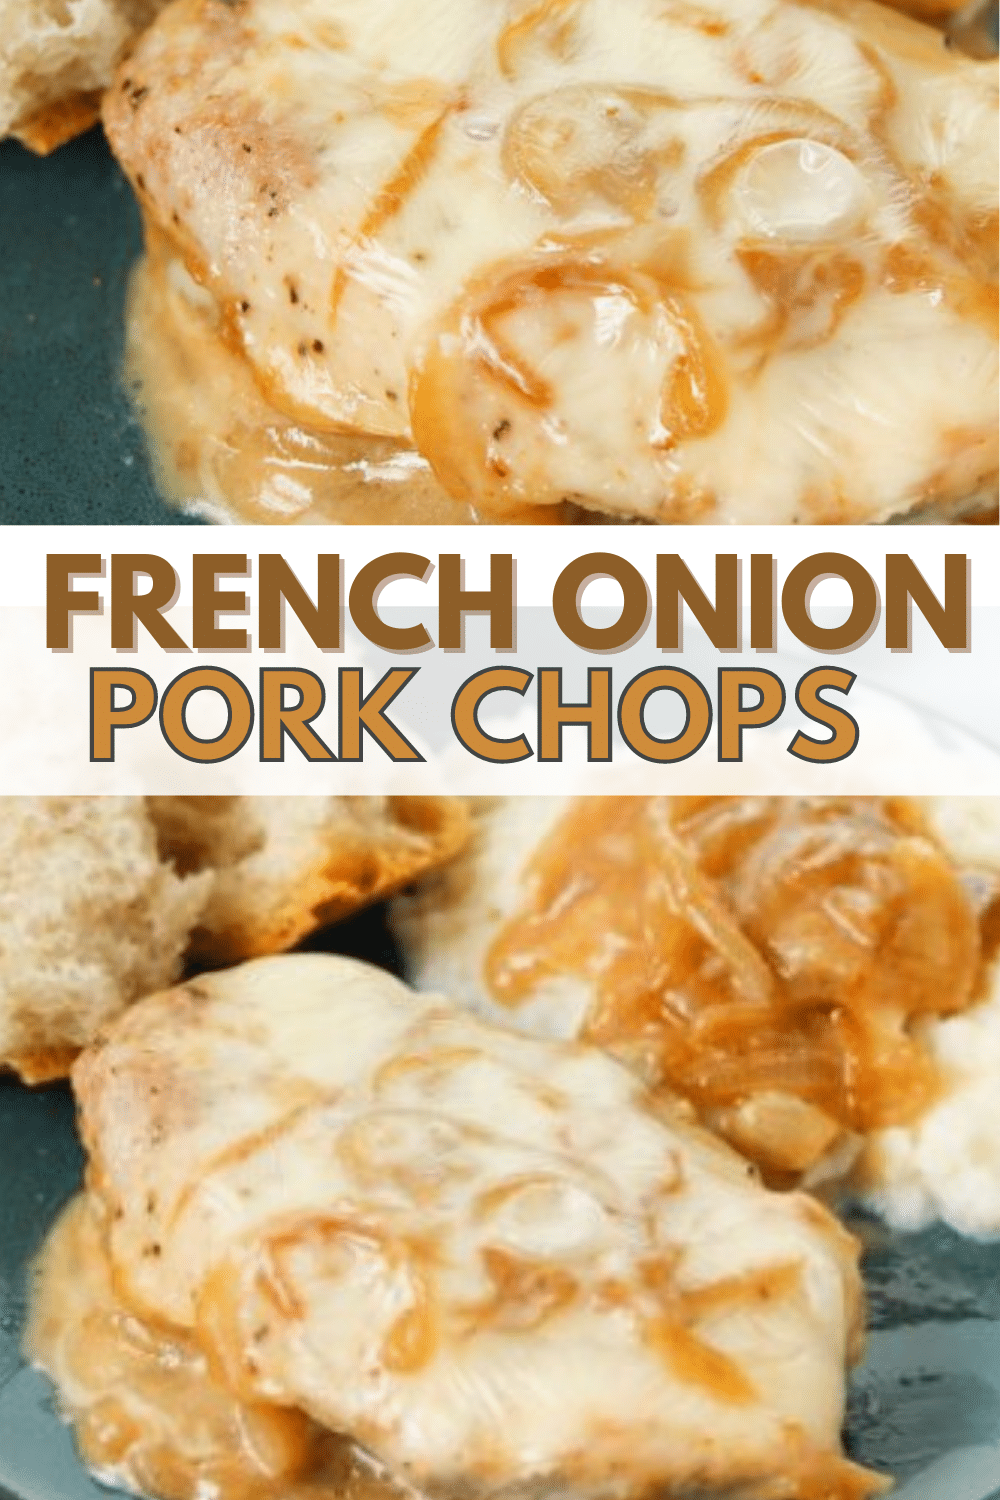 French Onion Pork Chops are flavorful and delicious with gravy and mozzarella cheese. An easy stove top recipe made with fresh pork chops and onion slices. #pork #frenchonion #easydinnerrecipe via @wondermomwannab